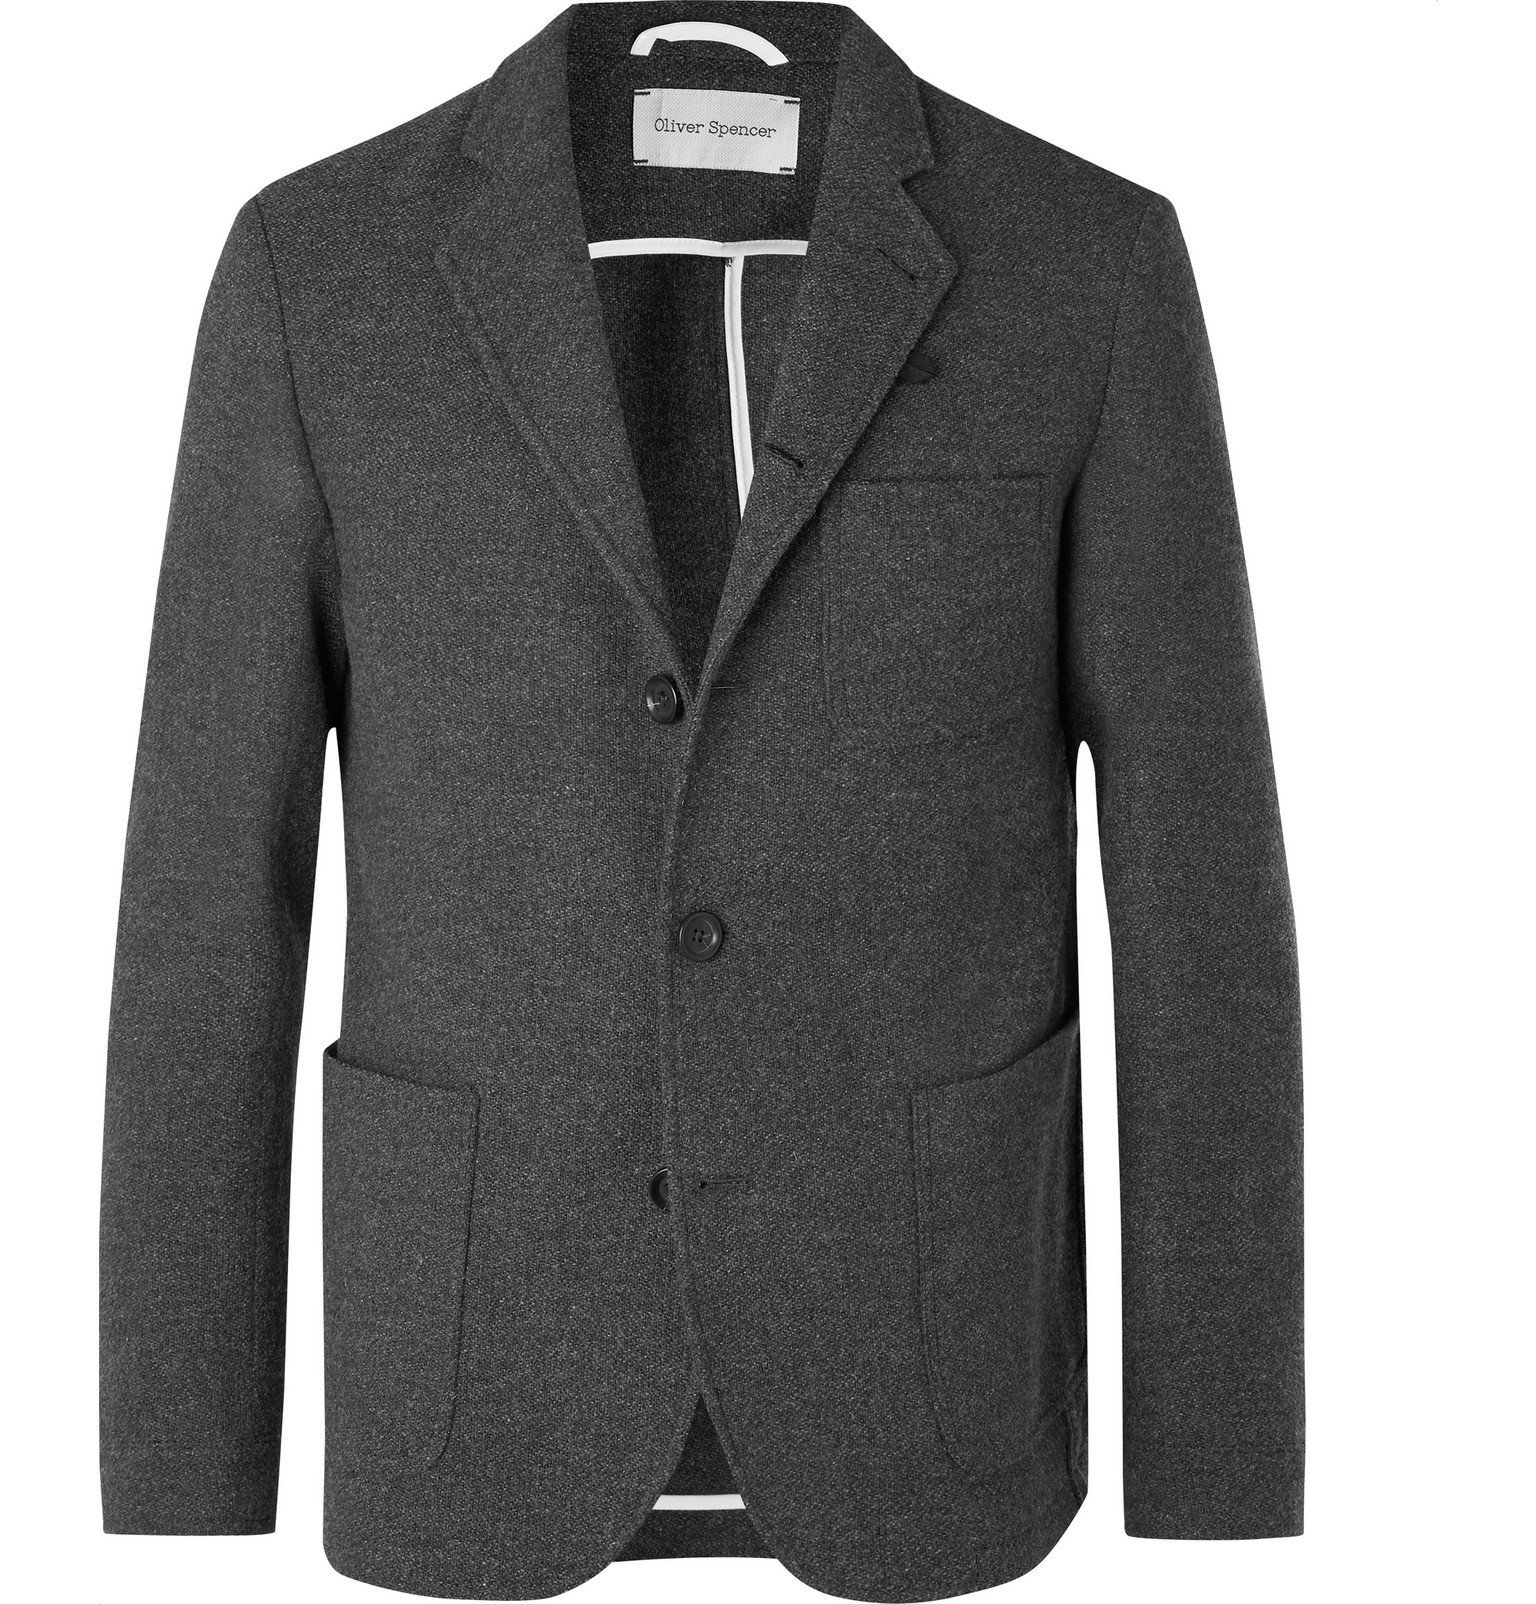 Oliver Spencer - Grey Solms Wool and Cotton-Blend Blazer - Gray